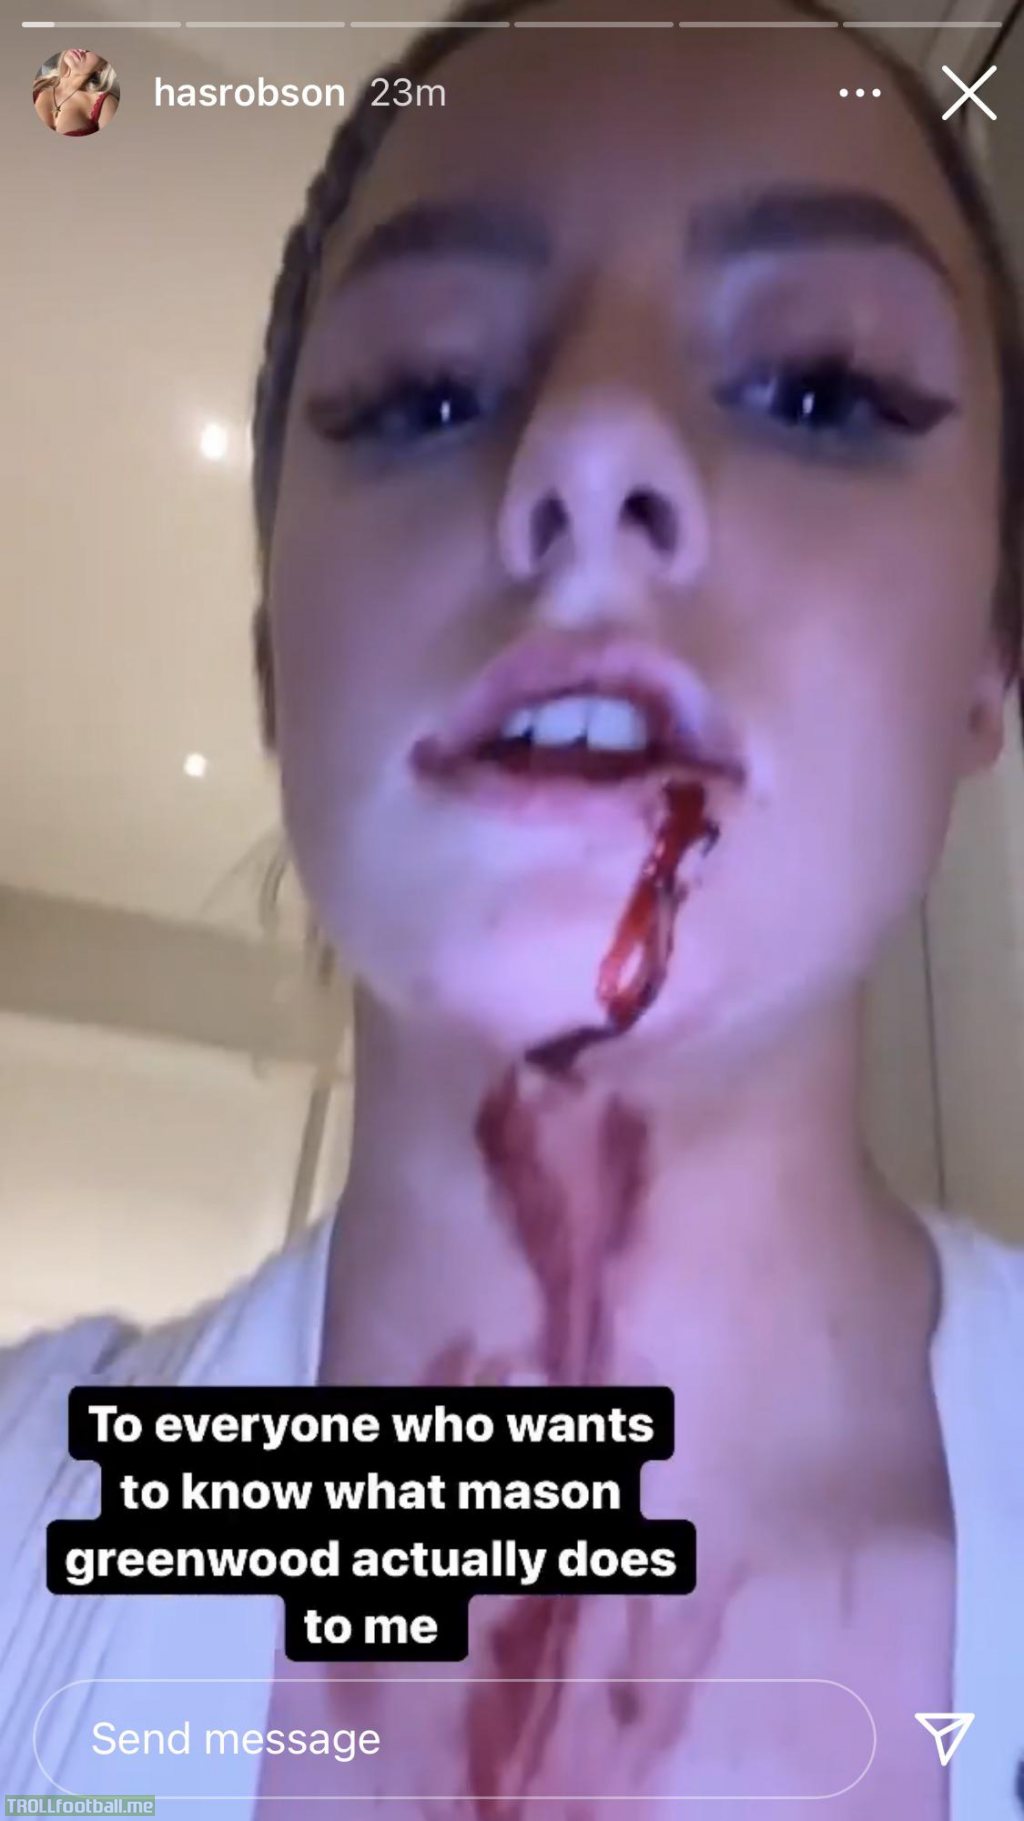 Mason Greenwood&#39;s partner Harriet Robson posted photos of her bleeding and  with bruises on her Instagram story and captioned it: “To everyone who  wants to know what Mason Greenwood actually does to